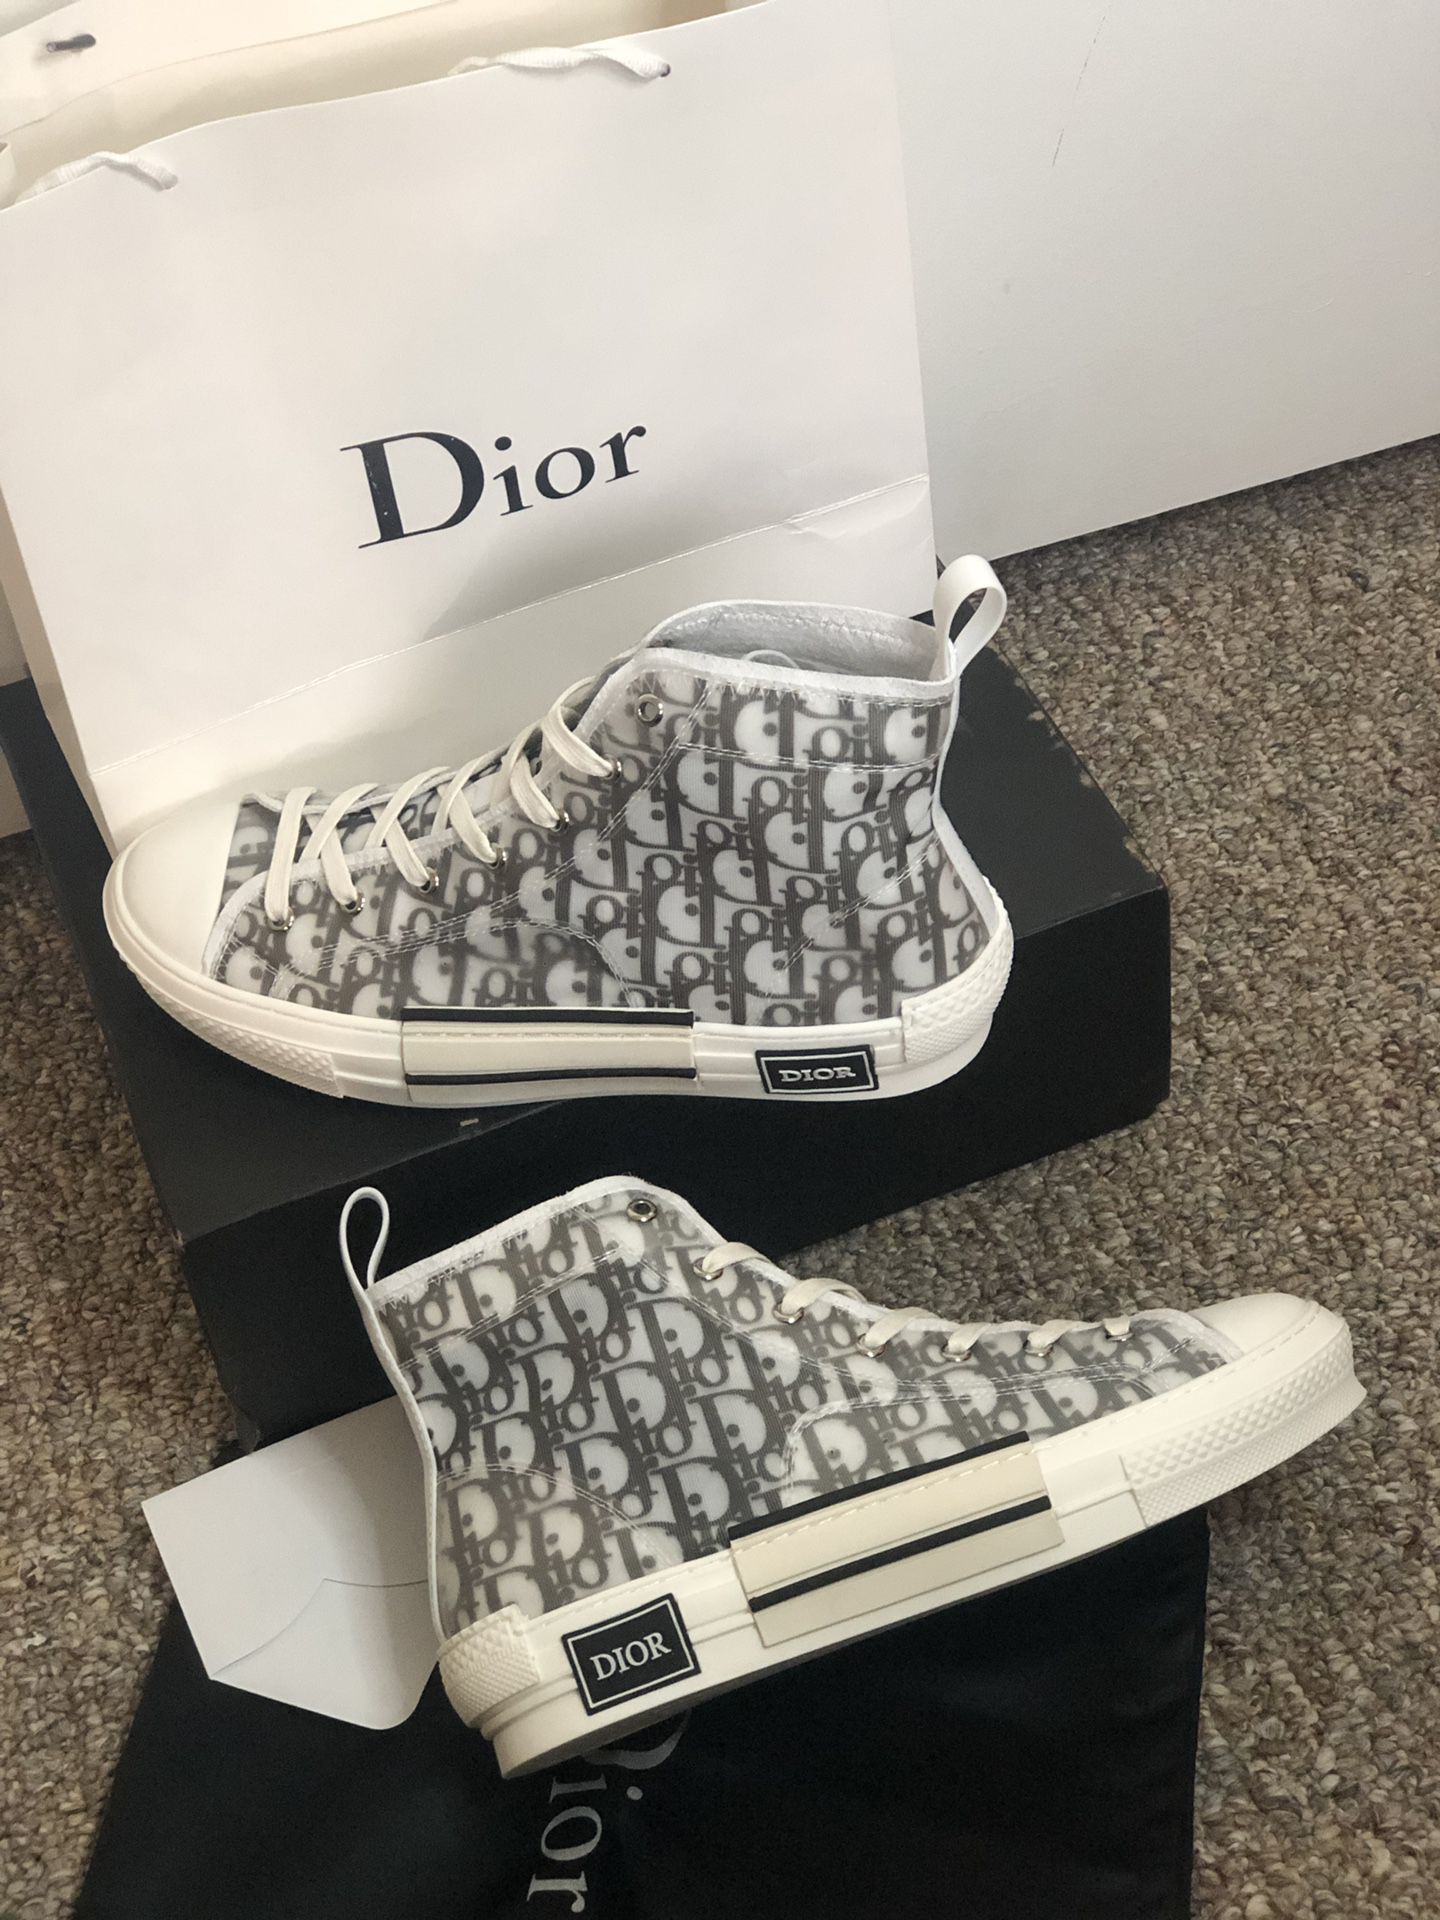 B23 high top sneaker in Dior Oblique, Size 44 EUR and 11 US